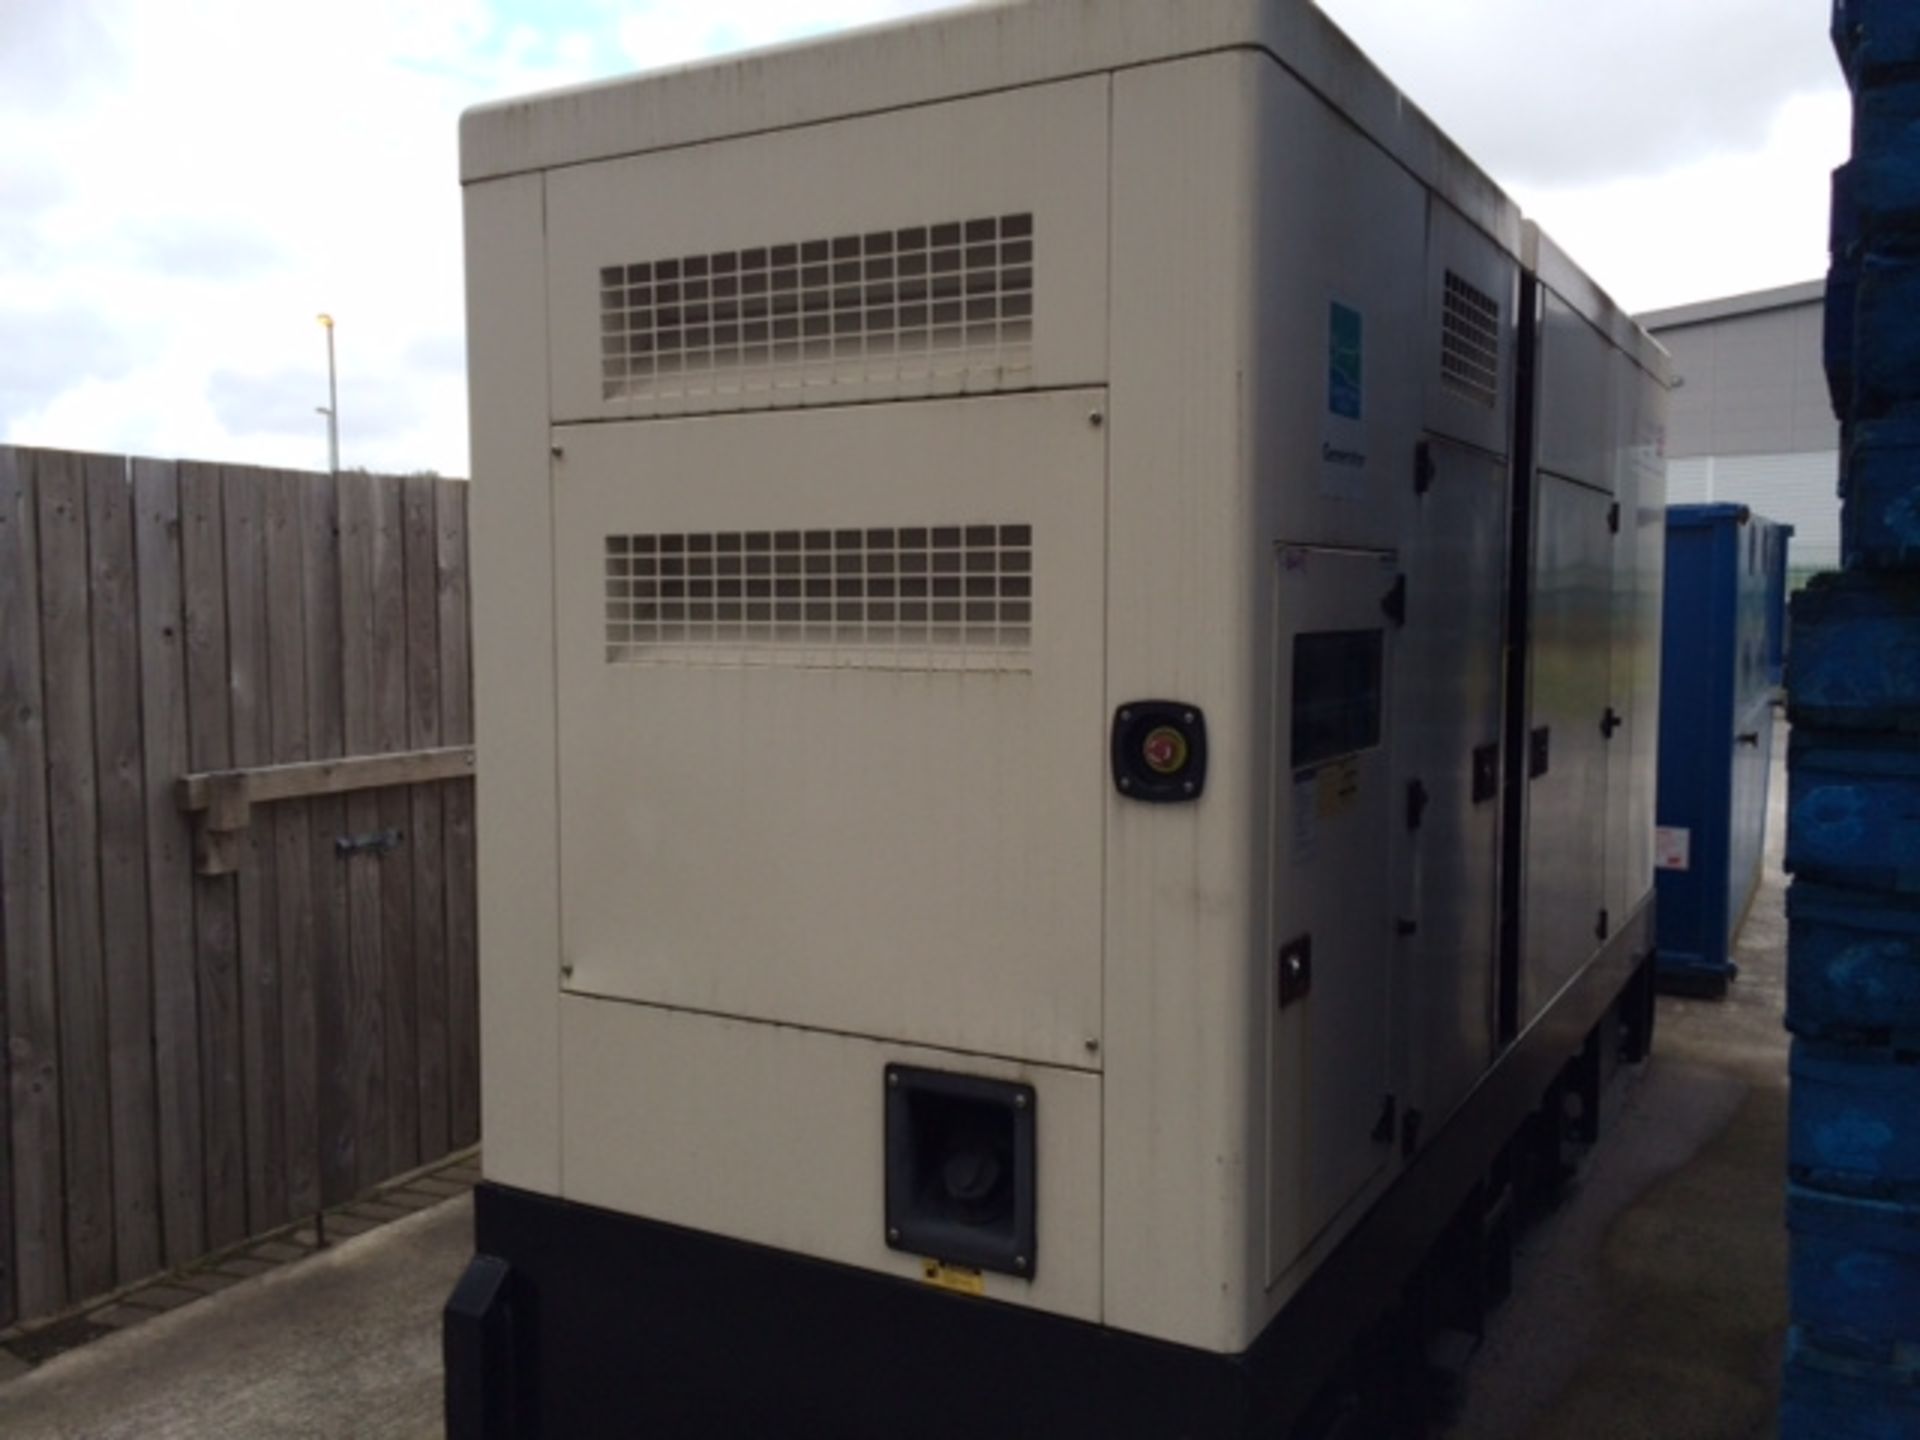 Genset Generator. 350 KVA. The generator has done 336hrs and is a Perkins engine - Bild 4 aus 10